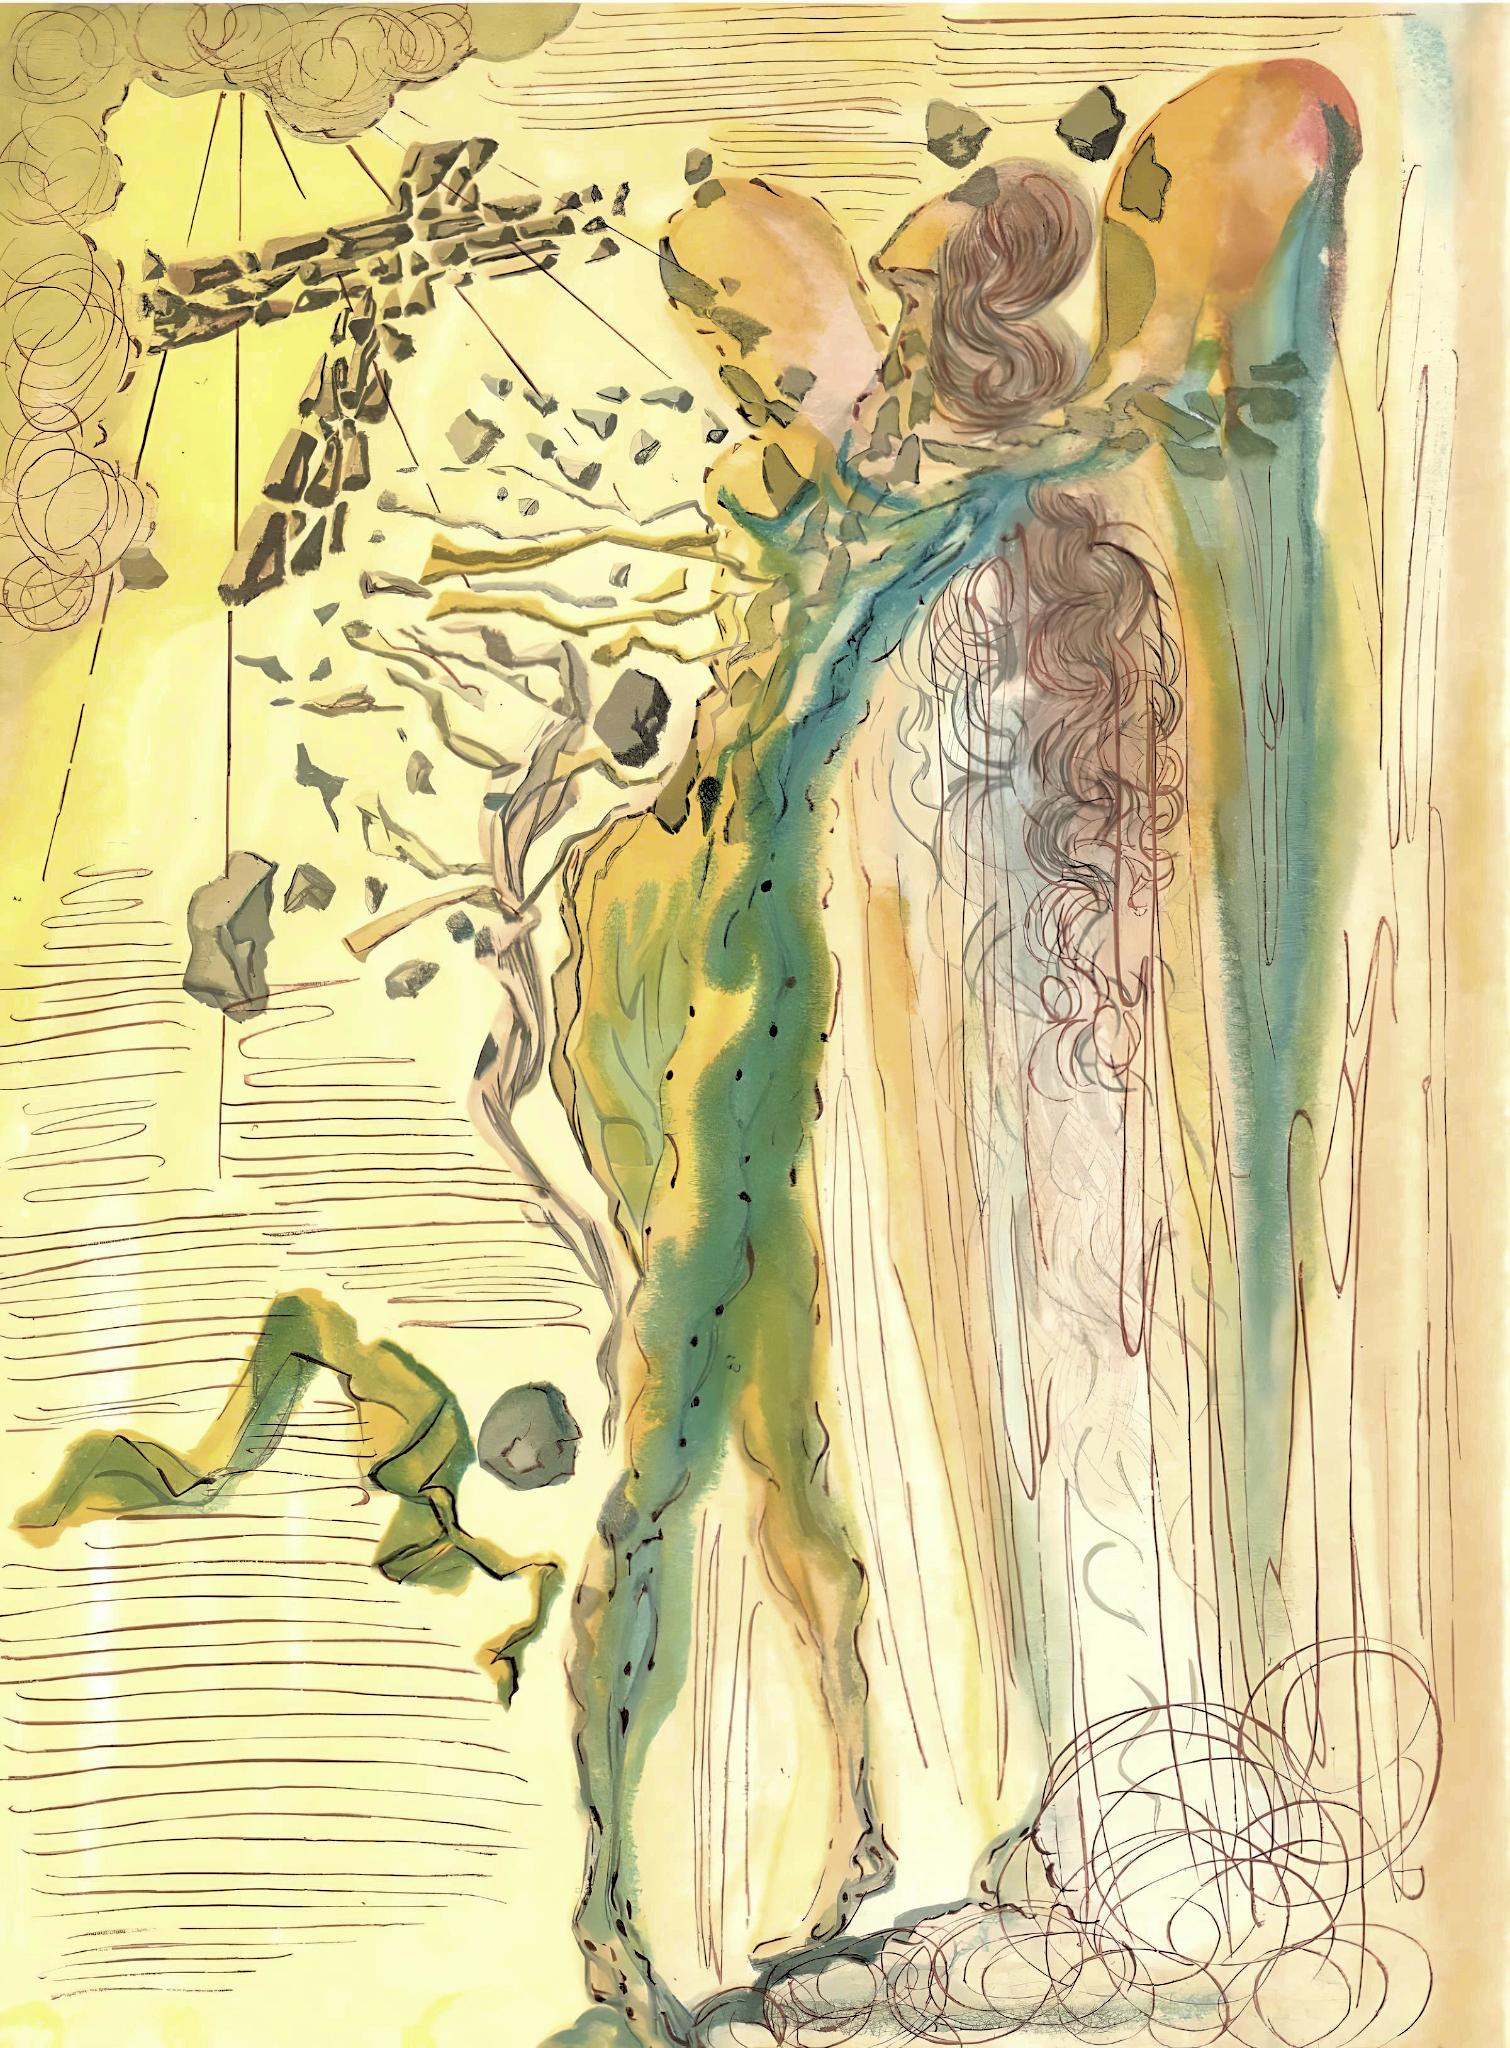 Salvador Dalí, Uproar of the Glorious Corps, Paradise: Canto 12 (Field 189-200)